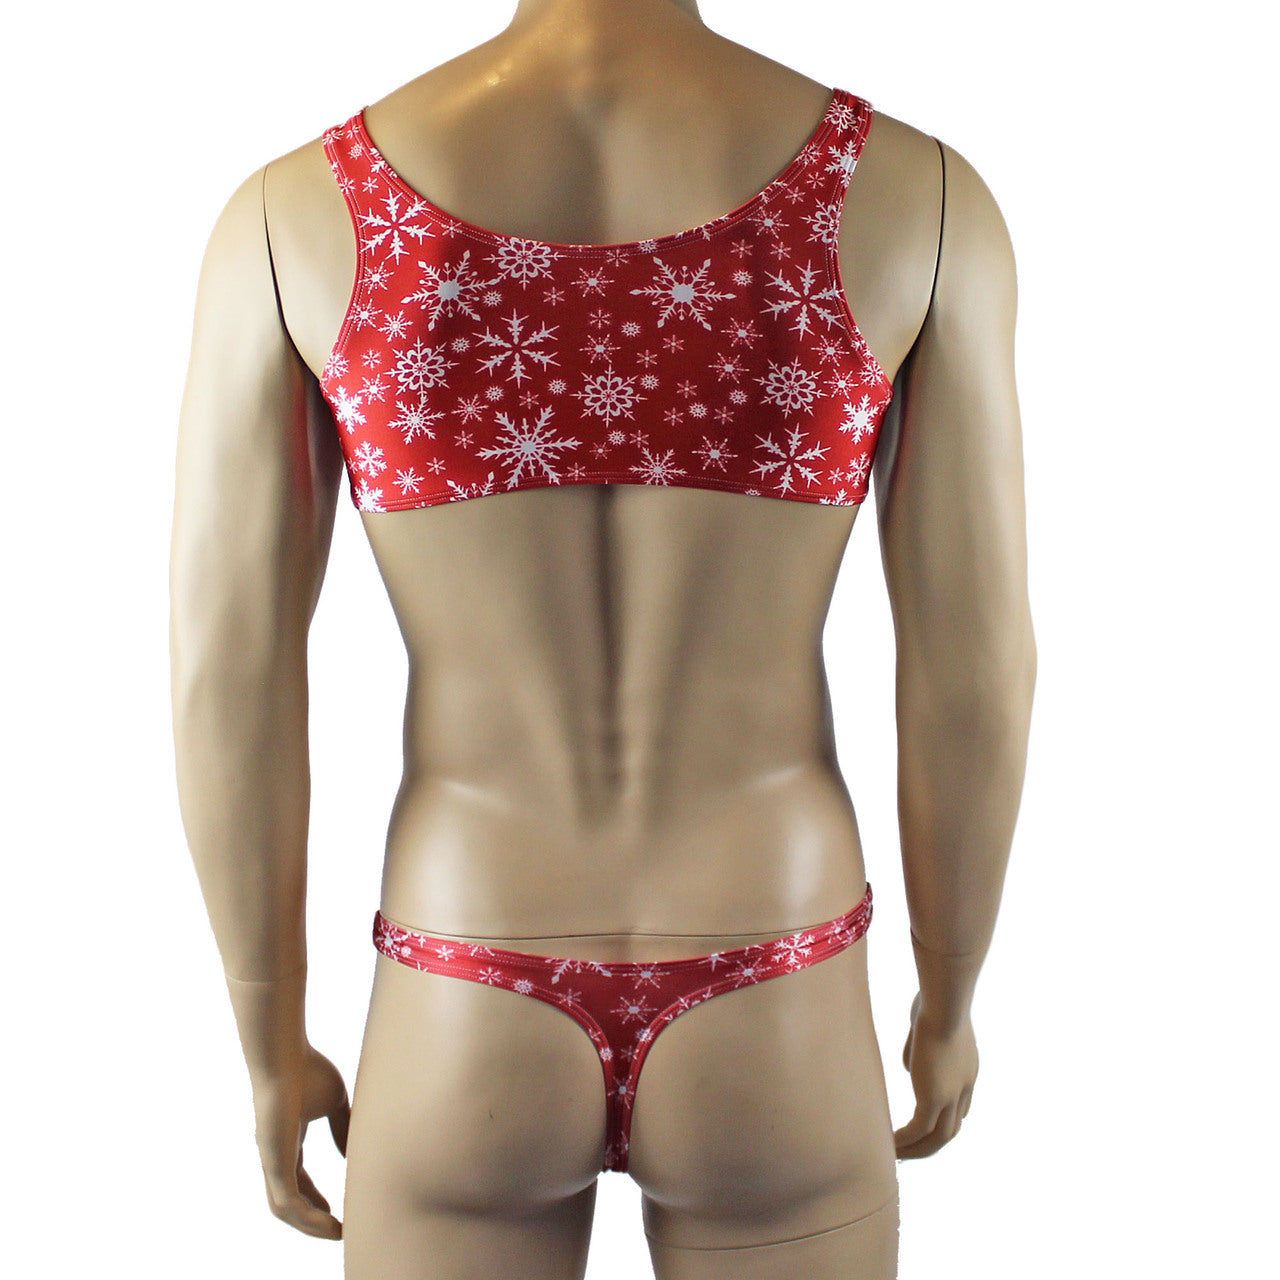 Mens Christmas Snowflake Bra Top & Low Cut Thong Red and White